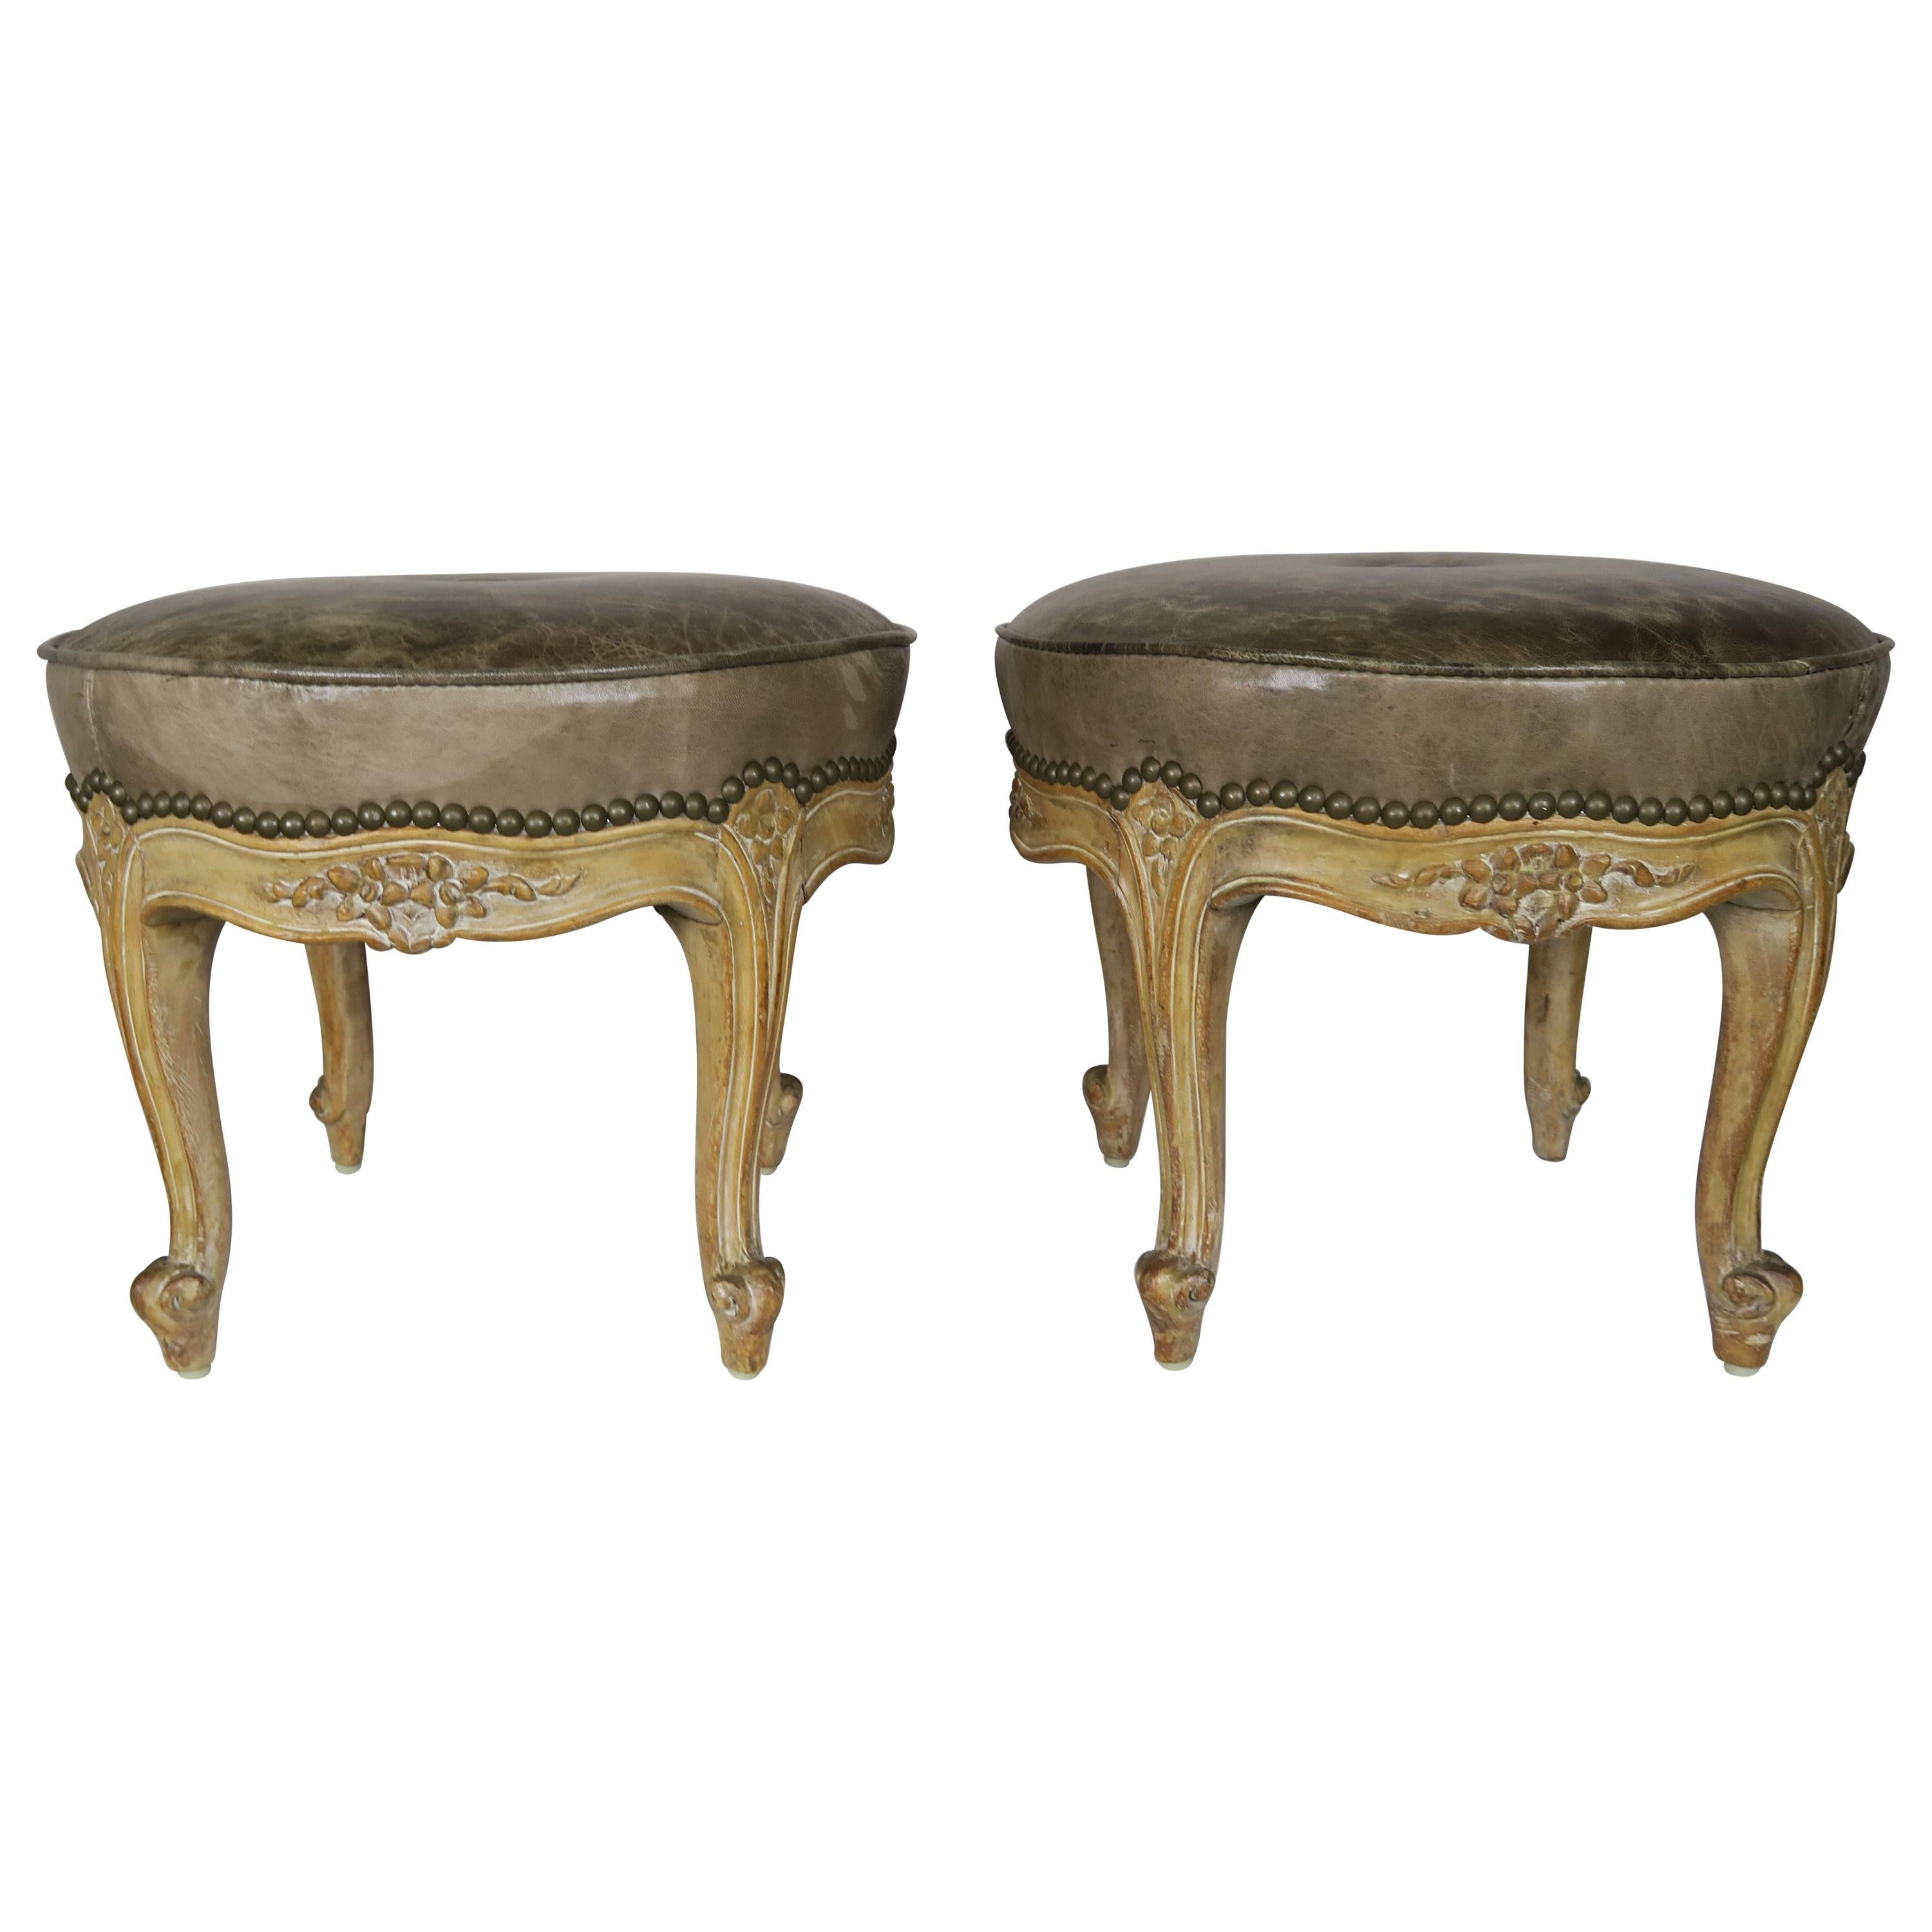 French Carved Walnut Leather Upholstered Stools, circa 1930s, Pair